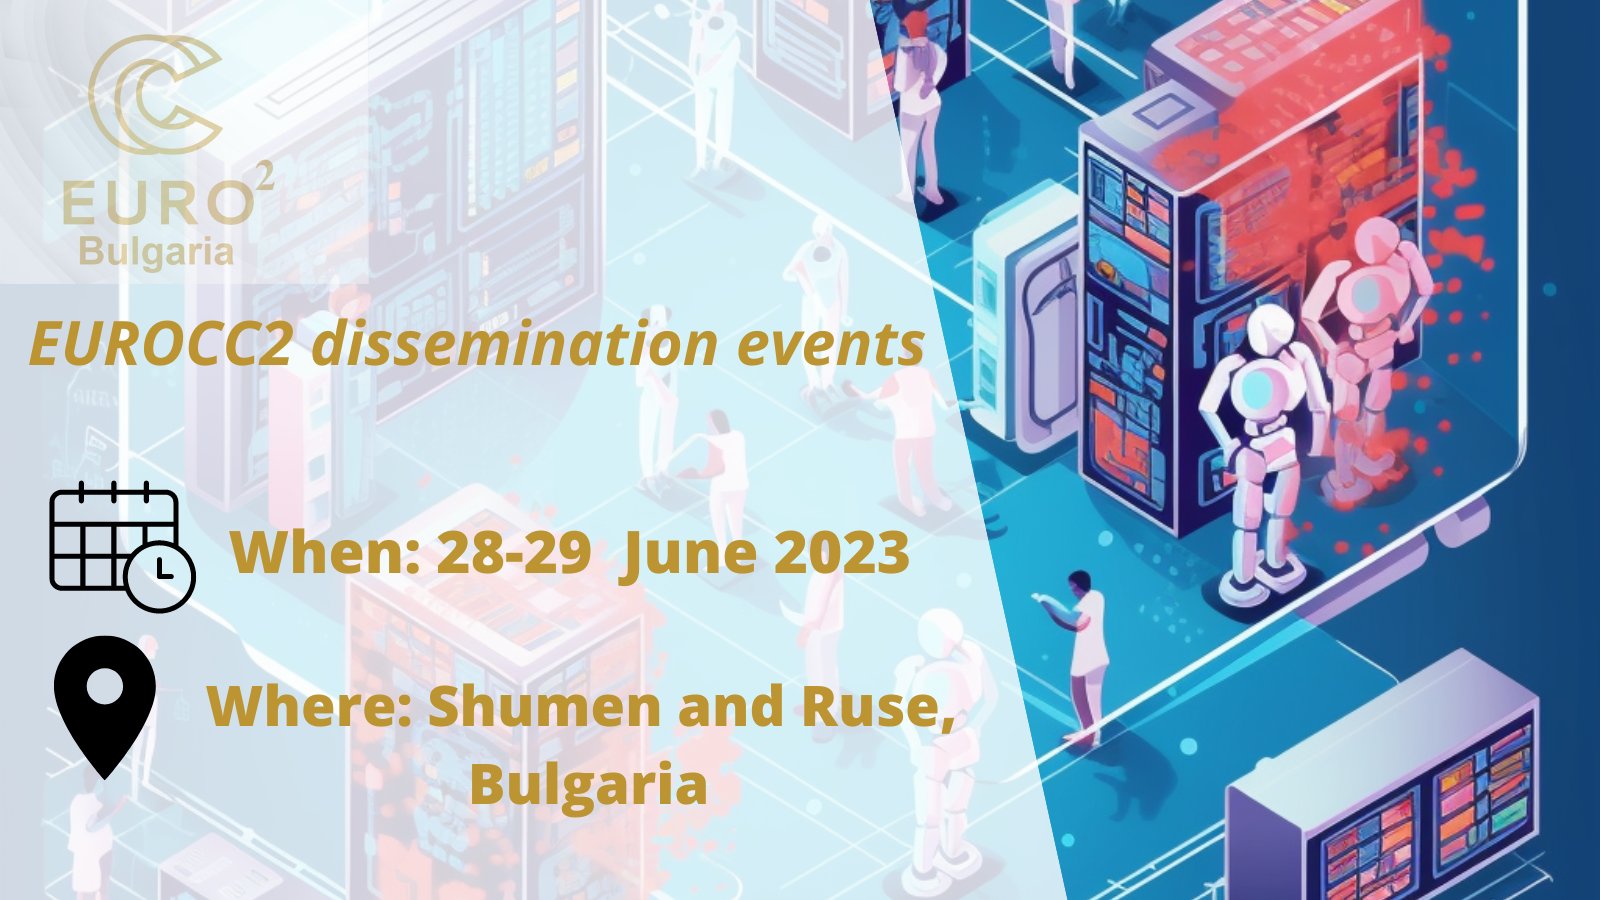 EUROCC2 dissemination events in Shumen and Russe, 28-29 June 2023